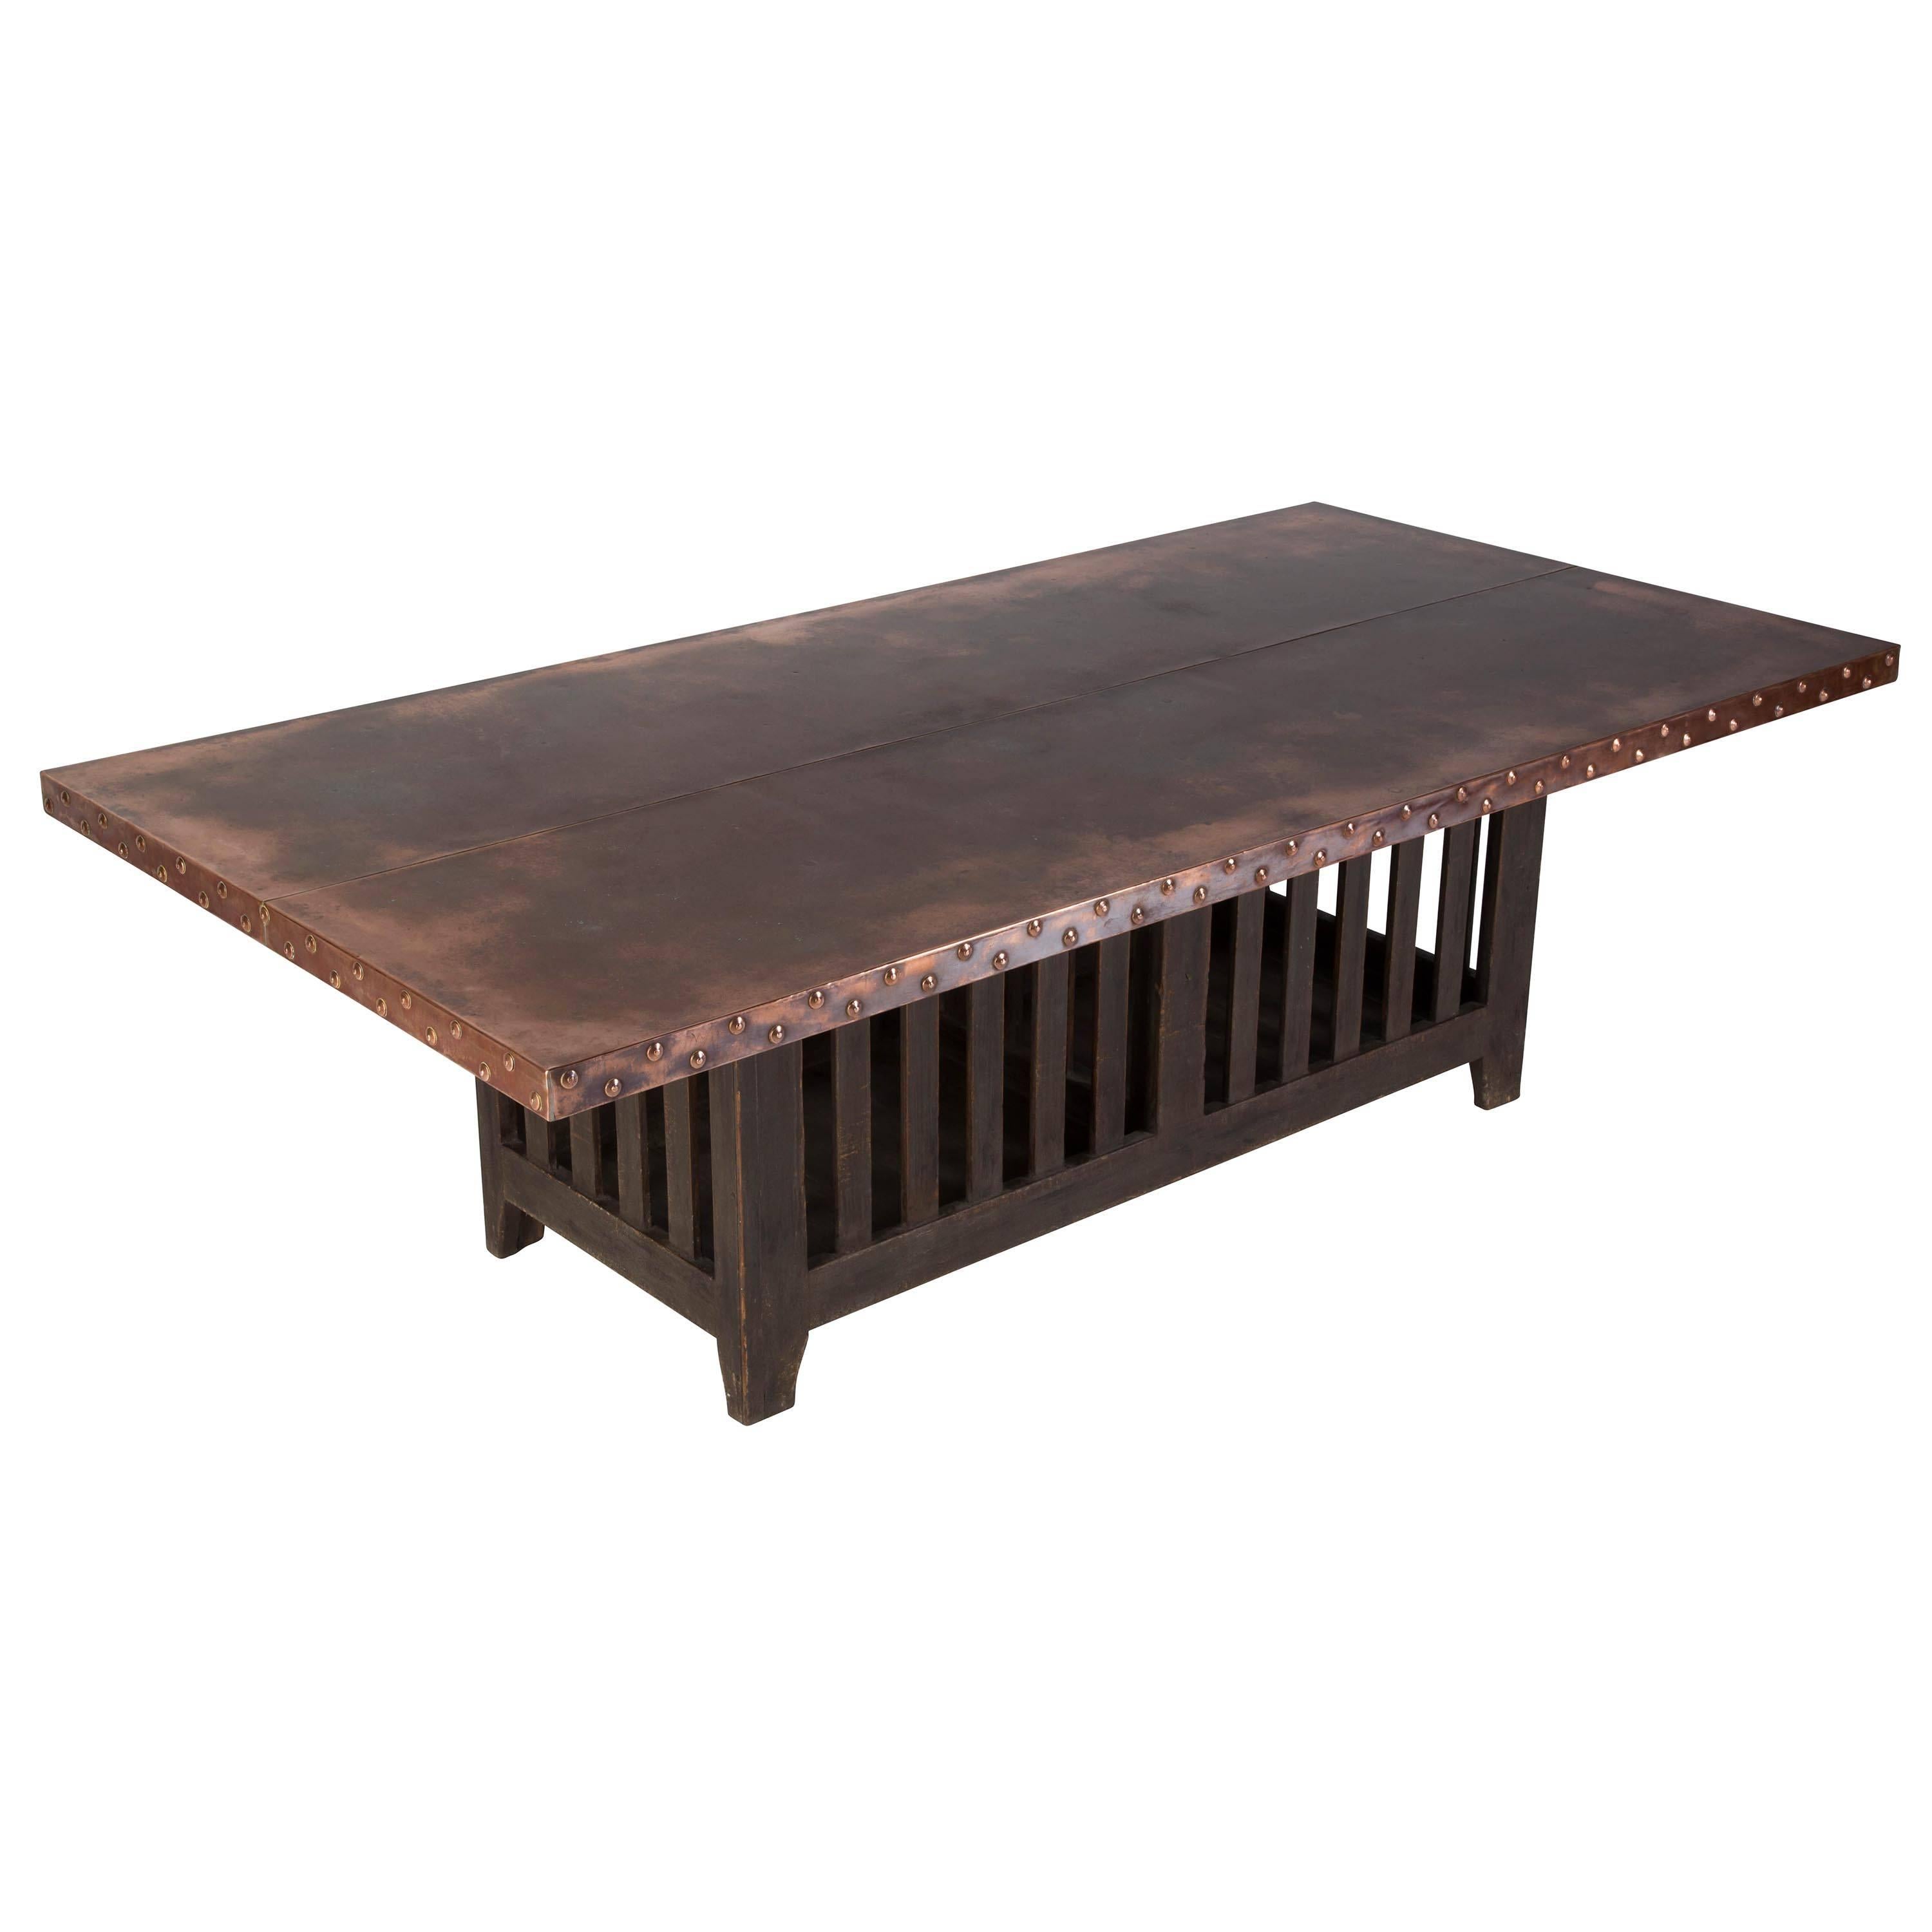 Large dining or shop table. The slatted base is from the arts and crafts design period and has a later handmade copper top. The base is lit by low energy lighting.